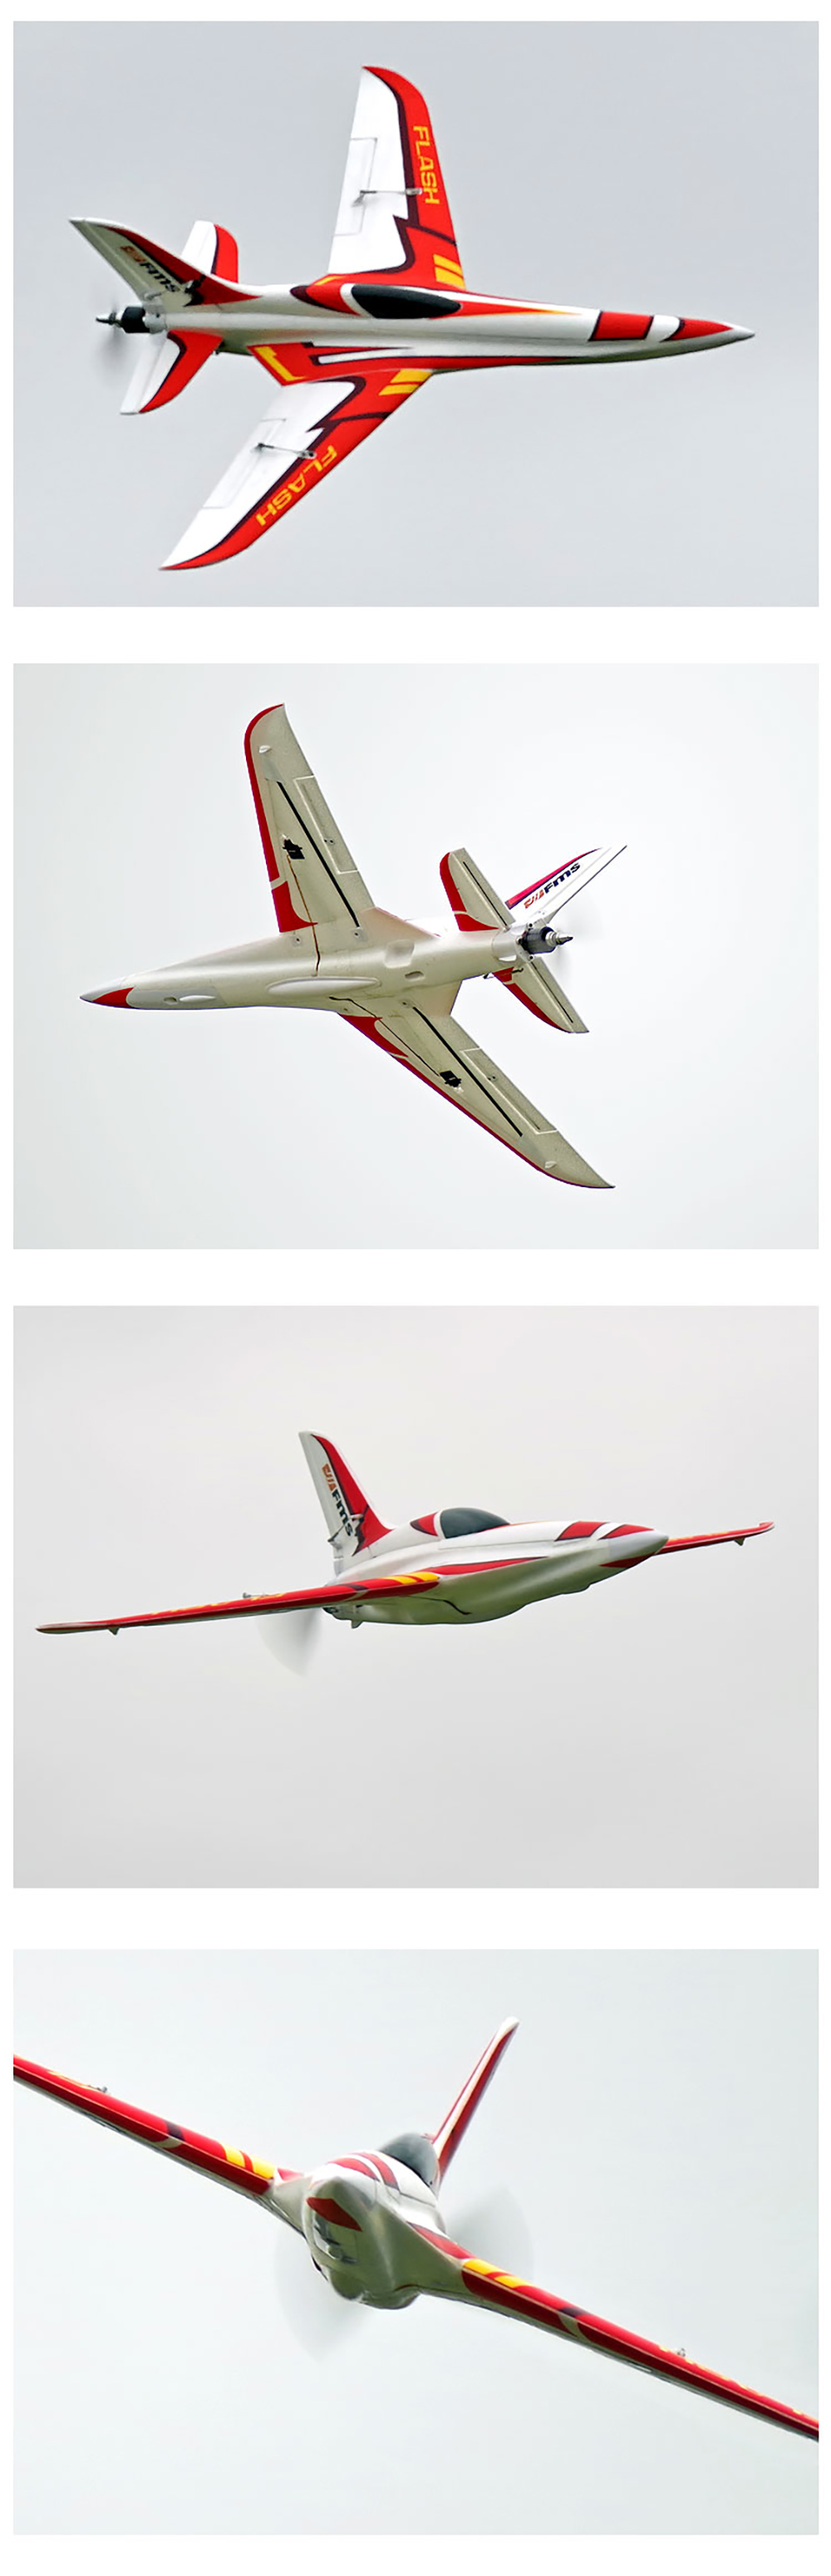 FMS-850mm-Wingspan-Flash-High-Speed-180kmh-4S-Racer-EPO-RC-Airplane-PNP-with-Reflex-Stabilizer-Fligh-1774714-10